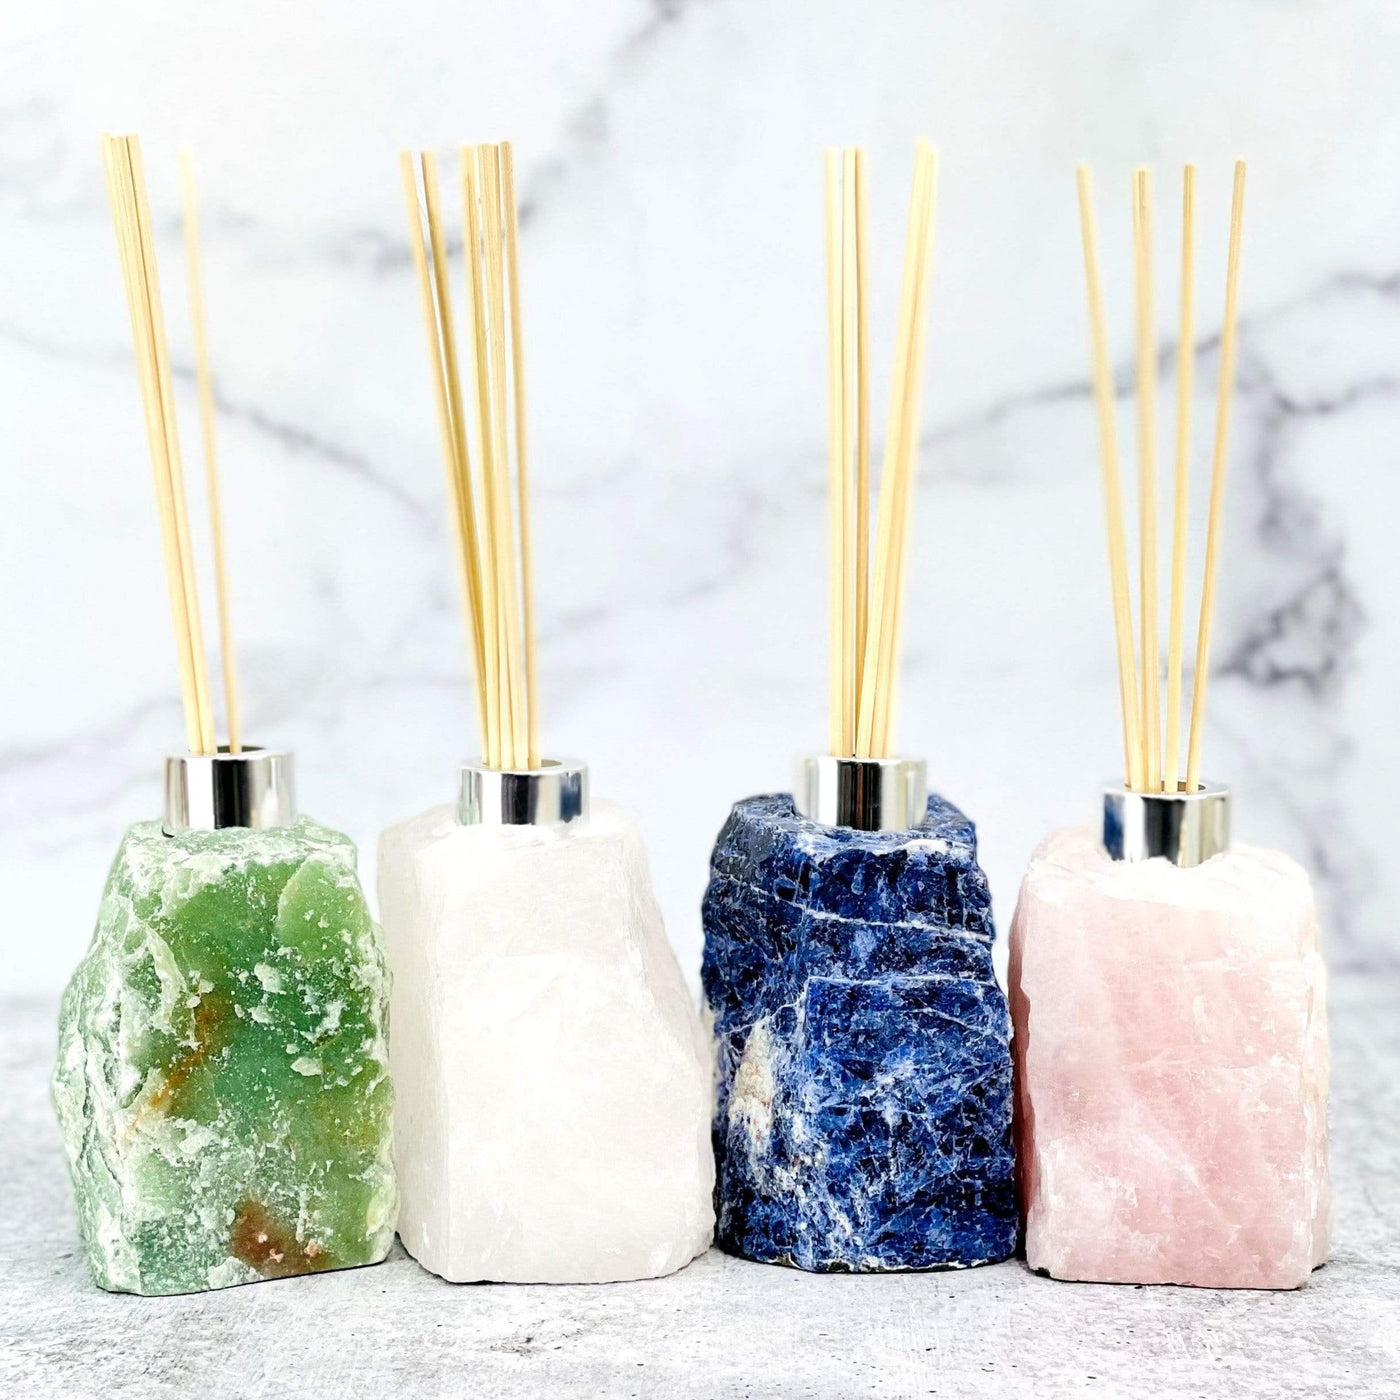 4 Rough Stone Diffuser Bottles in different crystals